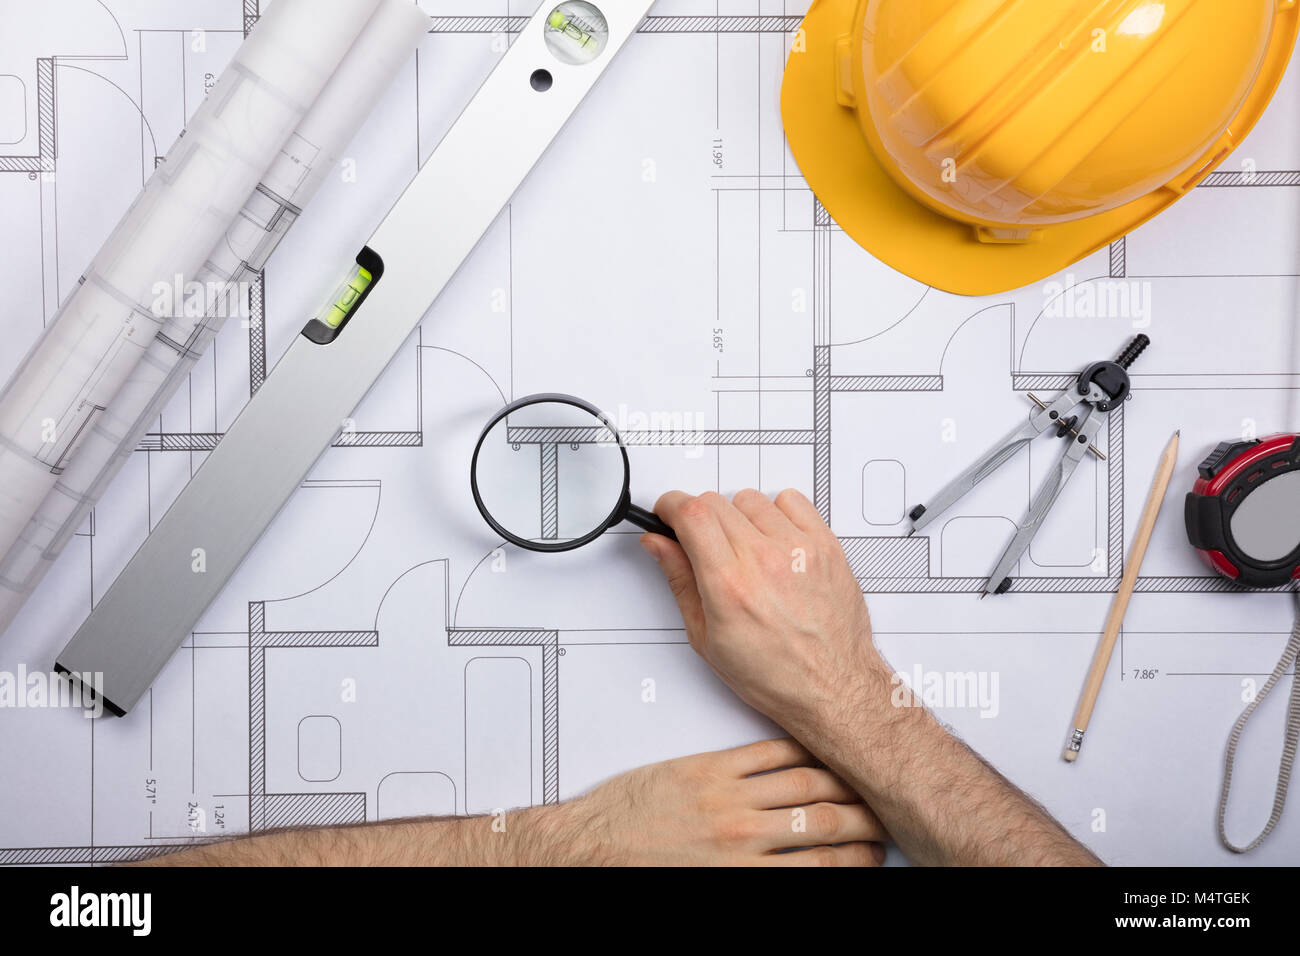 Close-up Of An Engineer Examining The Architectural Blueprint With Magnifying Glass At Workplace Stock Photo